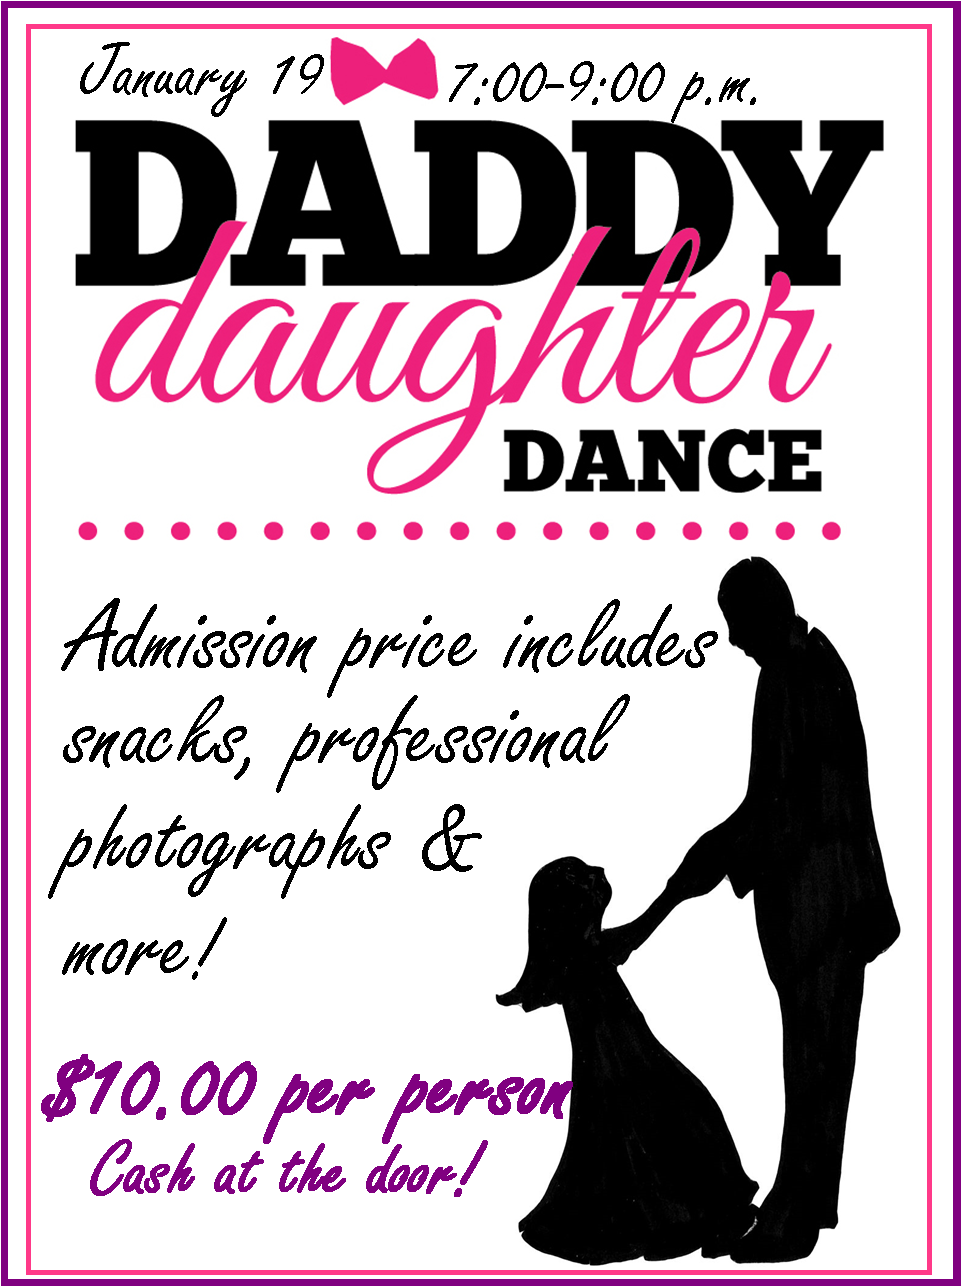 Download Daddy Daughter Dance Event Poster